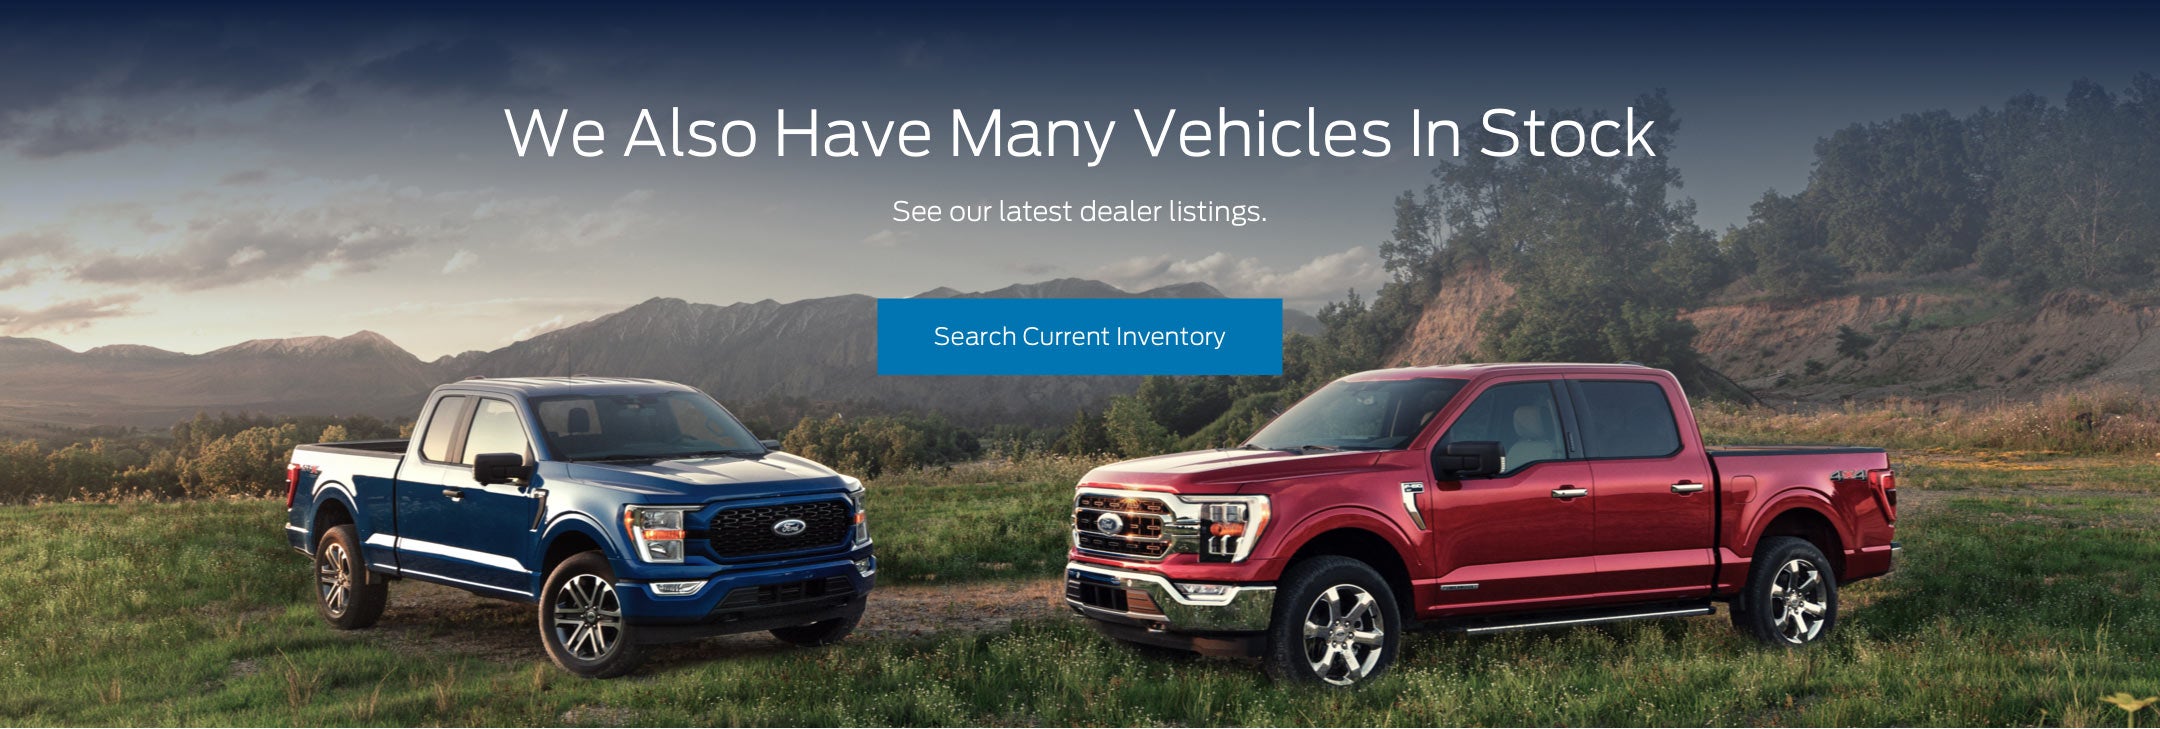 Ford vehicles in stock | Dean Sellers Ford in Troy MI